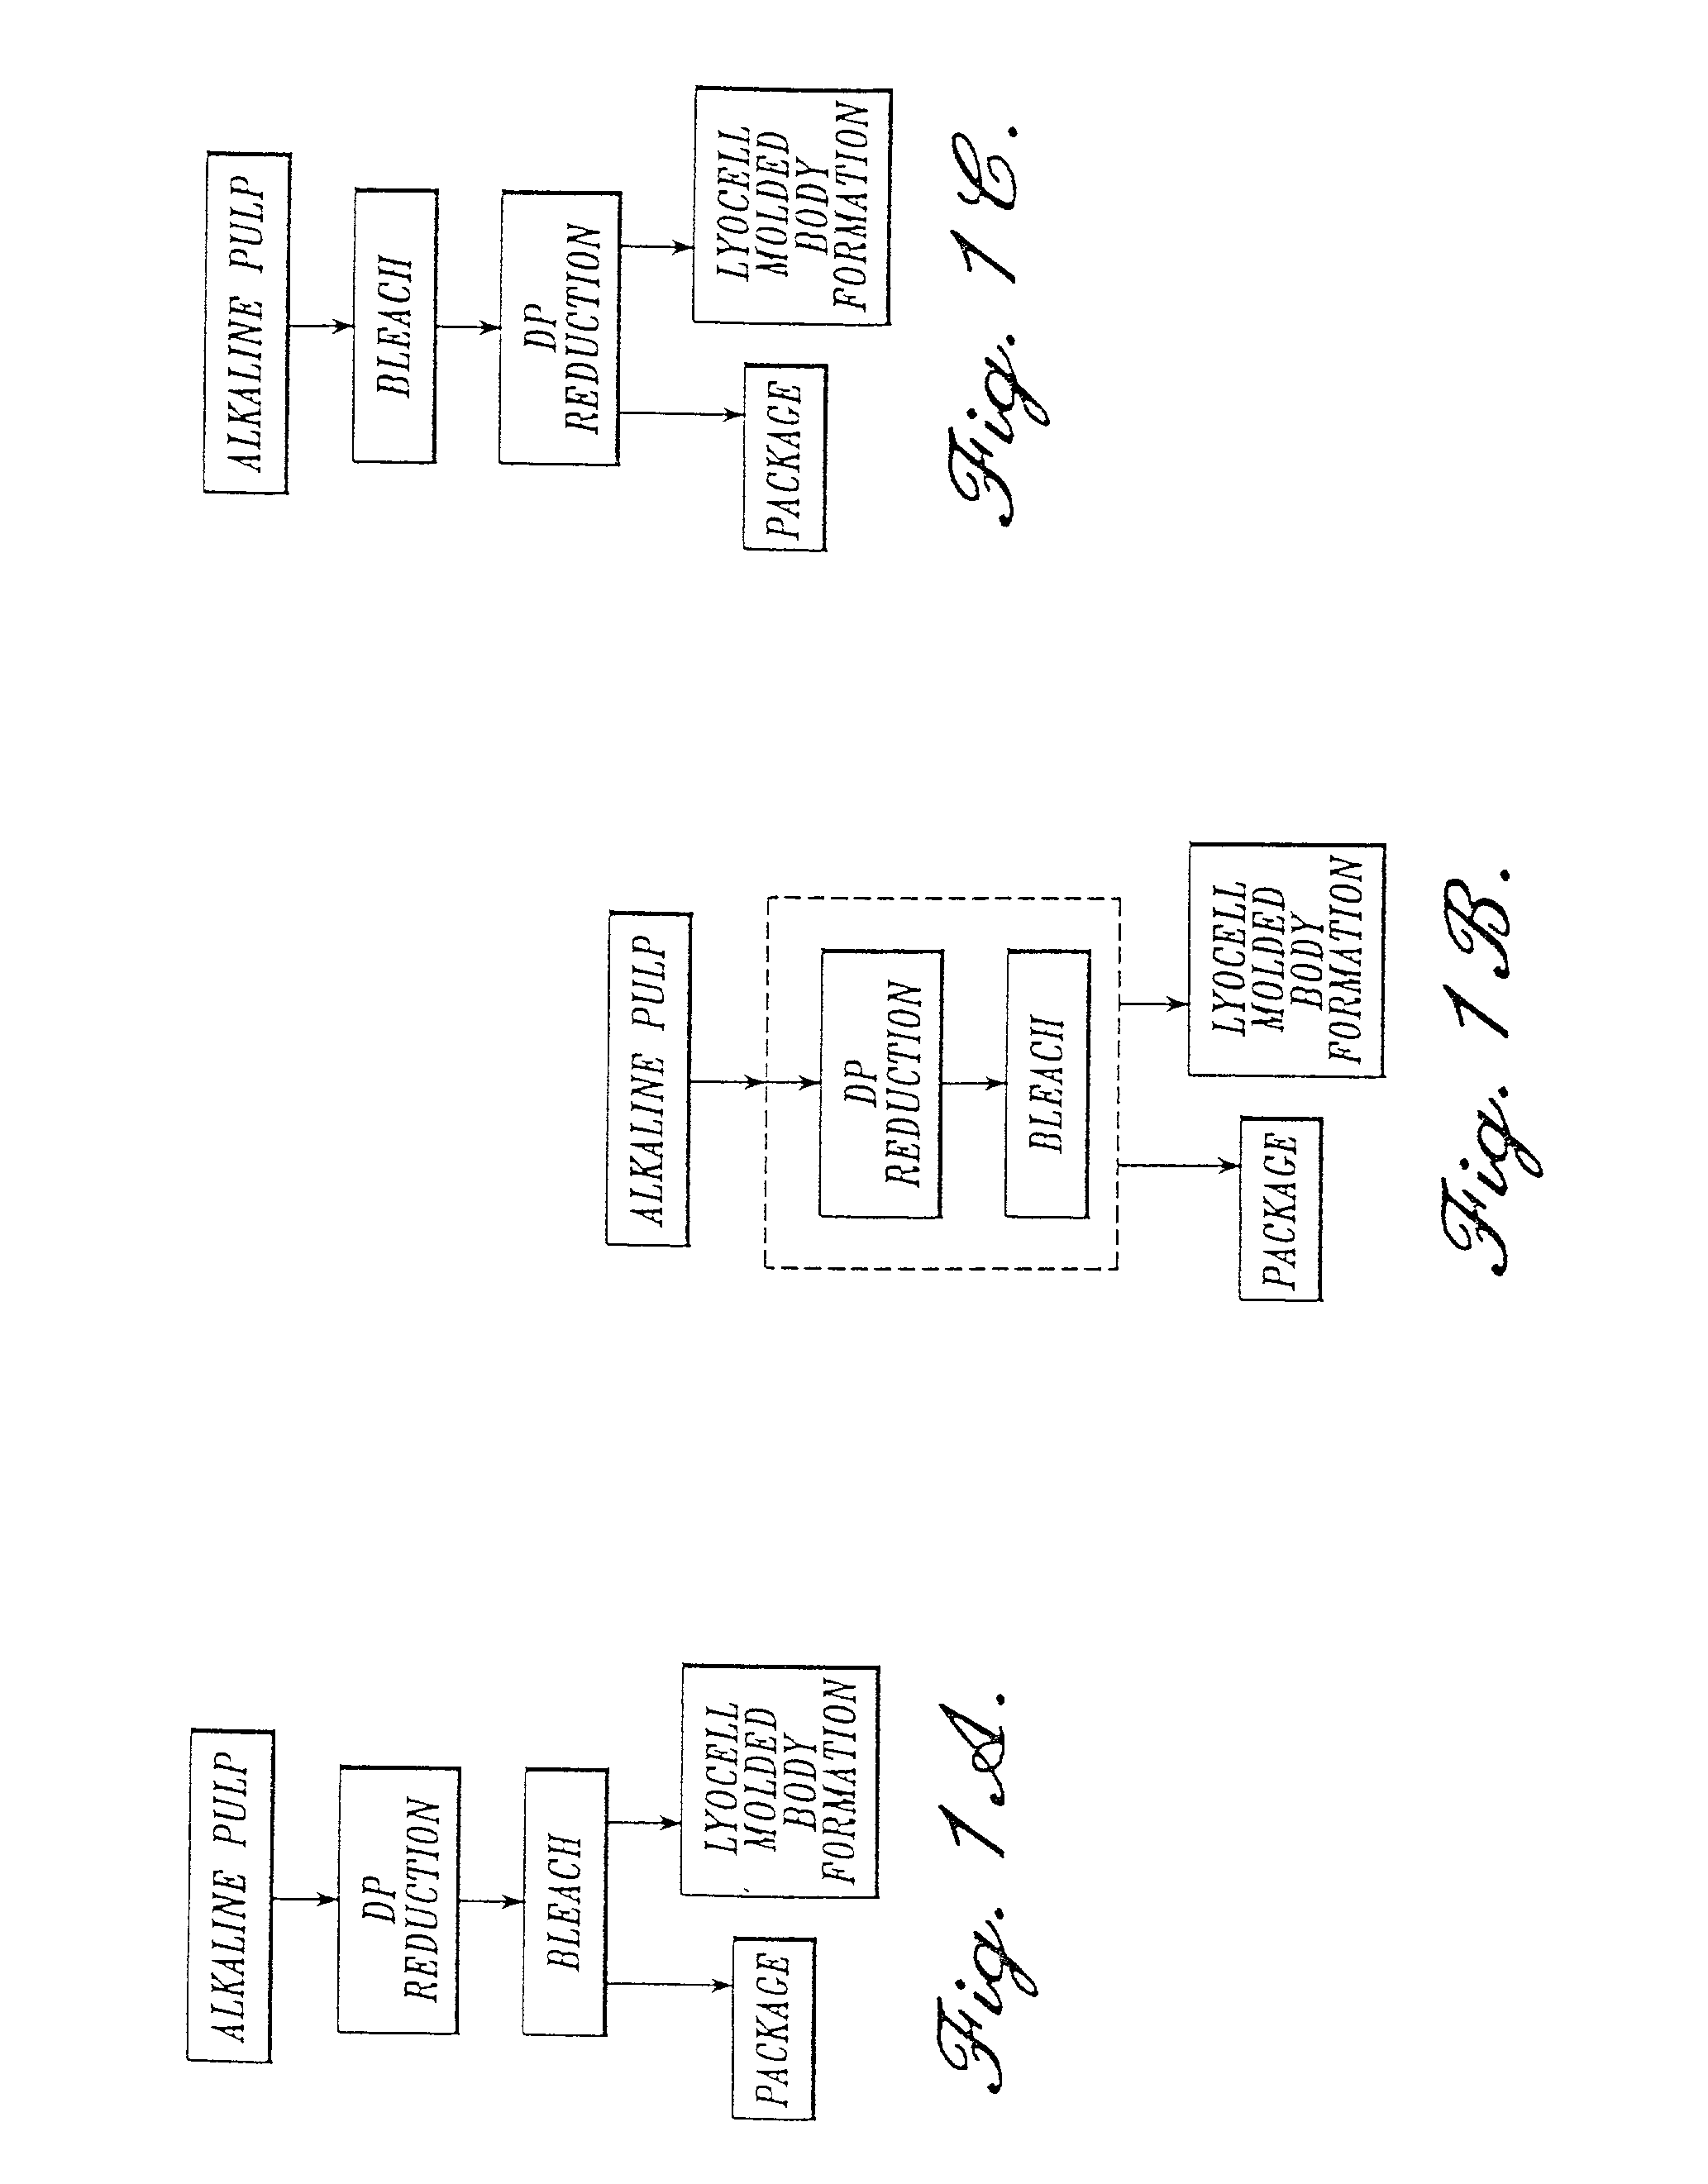 Process for making a composition for conversion to lyocell fiber from an alkaline pulp having low average degree of polymerization values